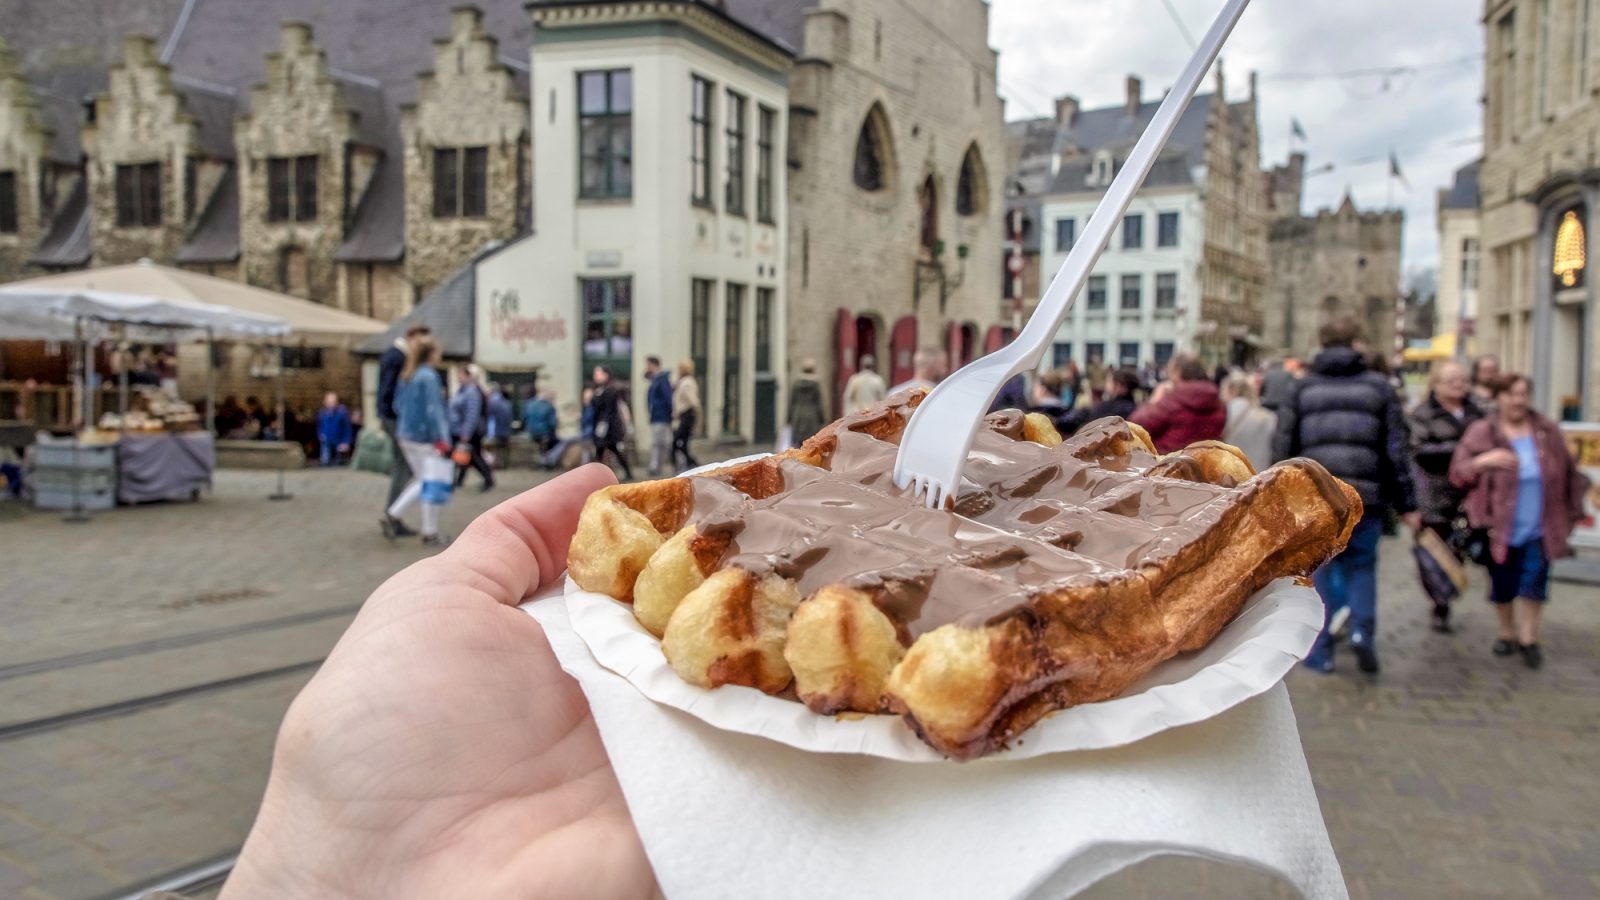 4 days in Belgium | 4 cities | Brussels, Bruges, Ghent, Dinant | waffles and beer and chocolate | Gent, Brugge, Bruxelles, Dinant | What to do in Belgium | Things to do in Belgium | Where to stay in Belgium | Flanders